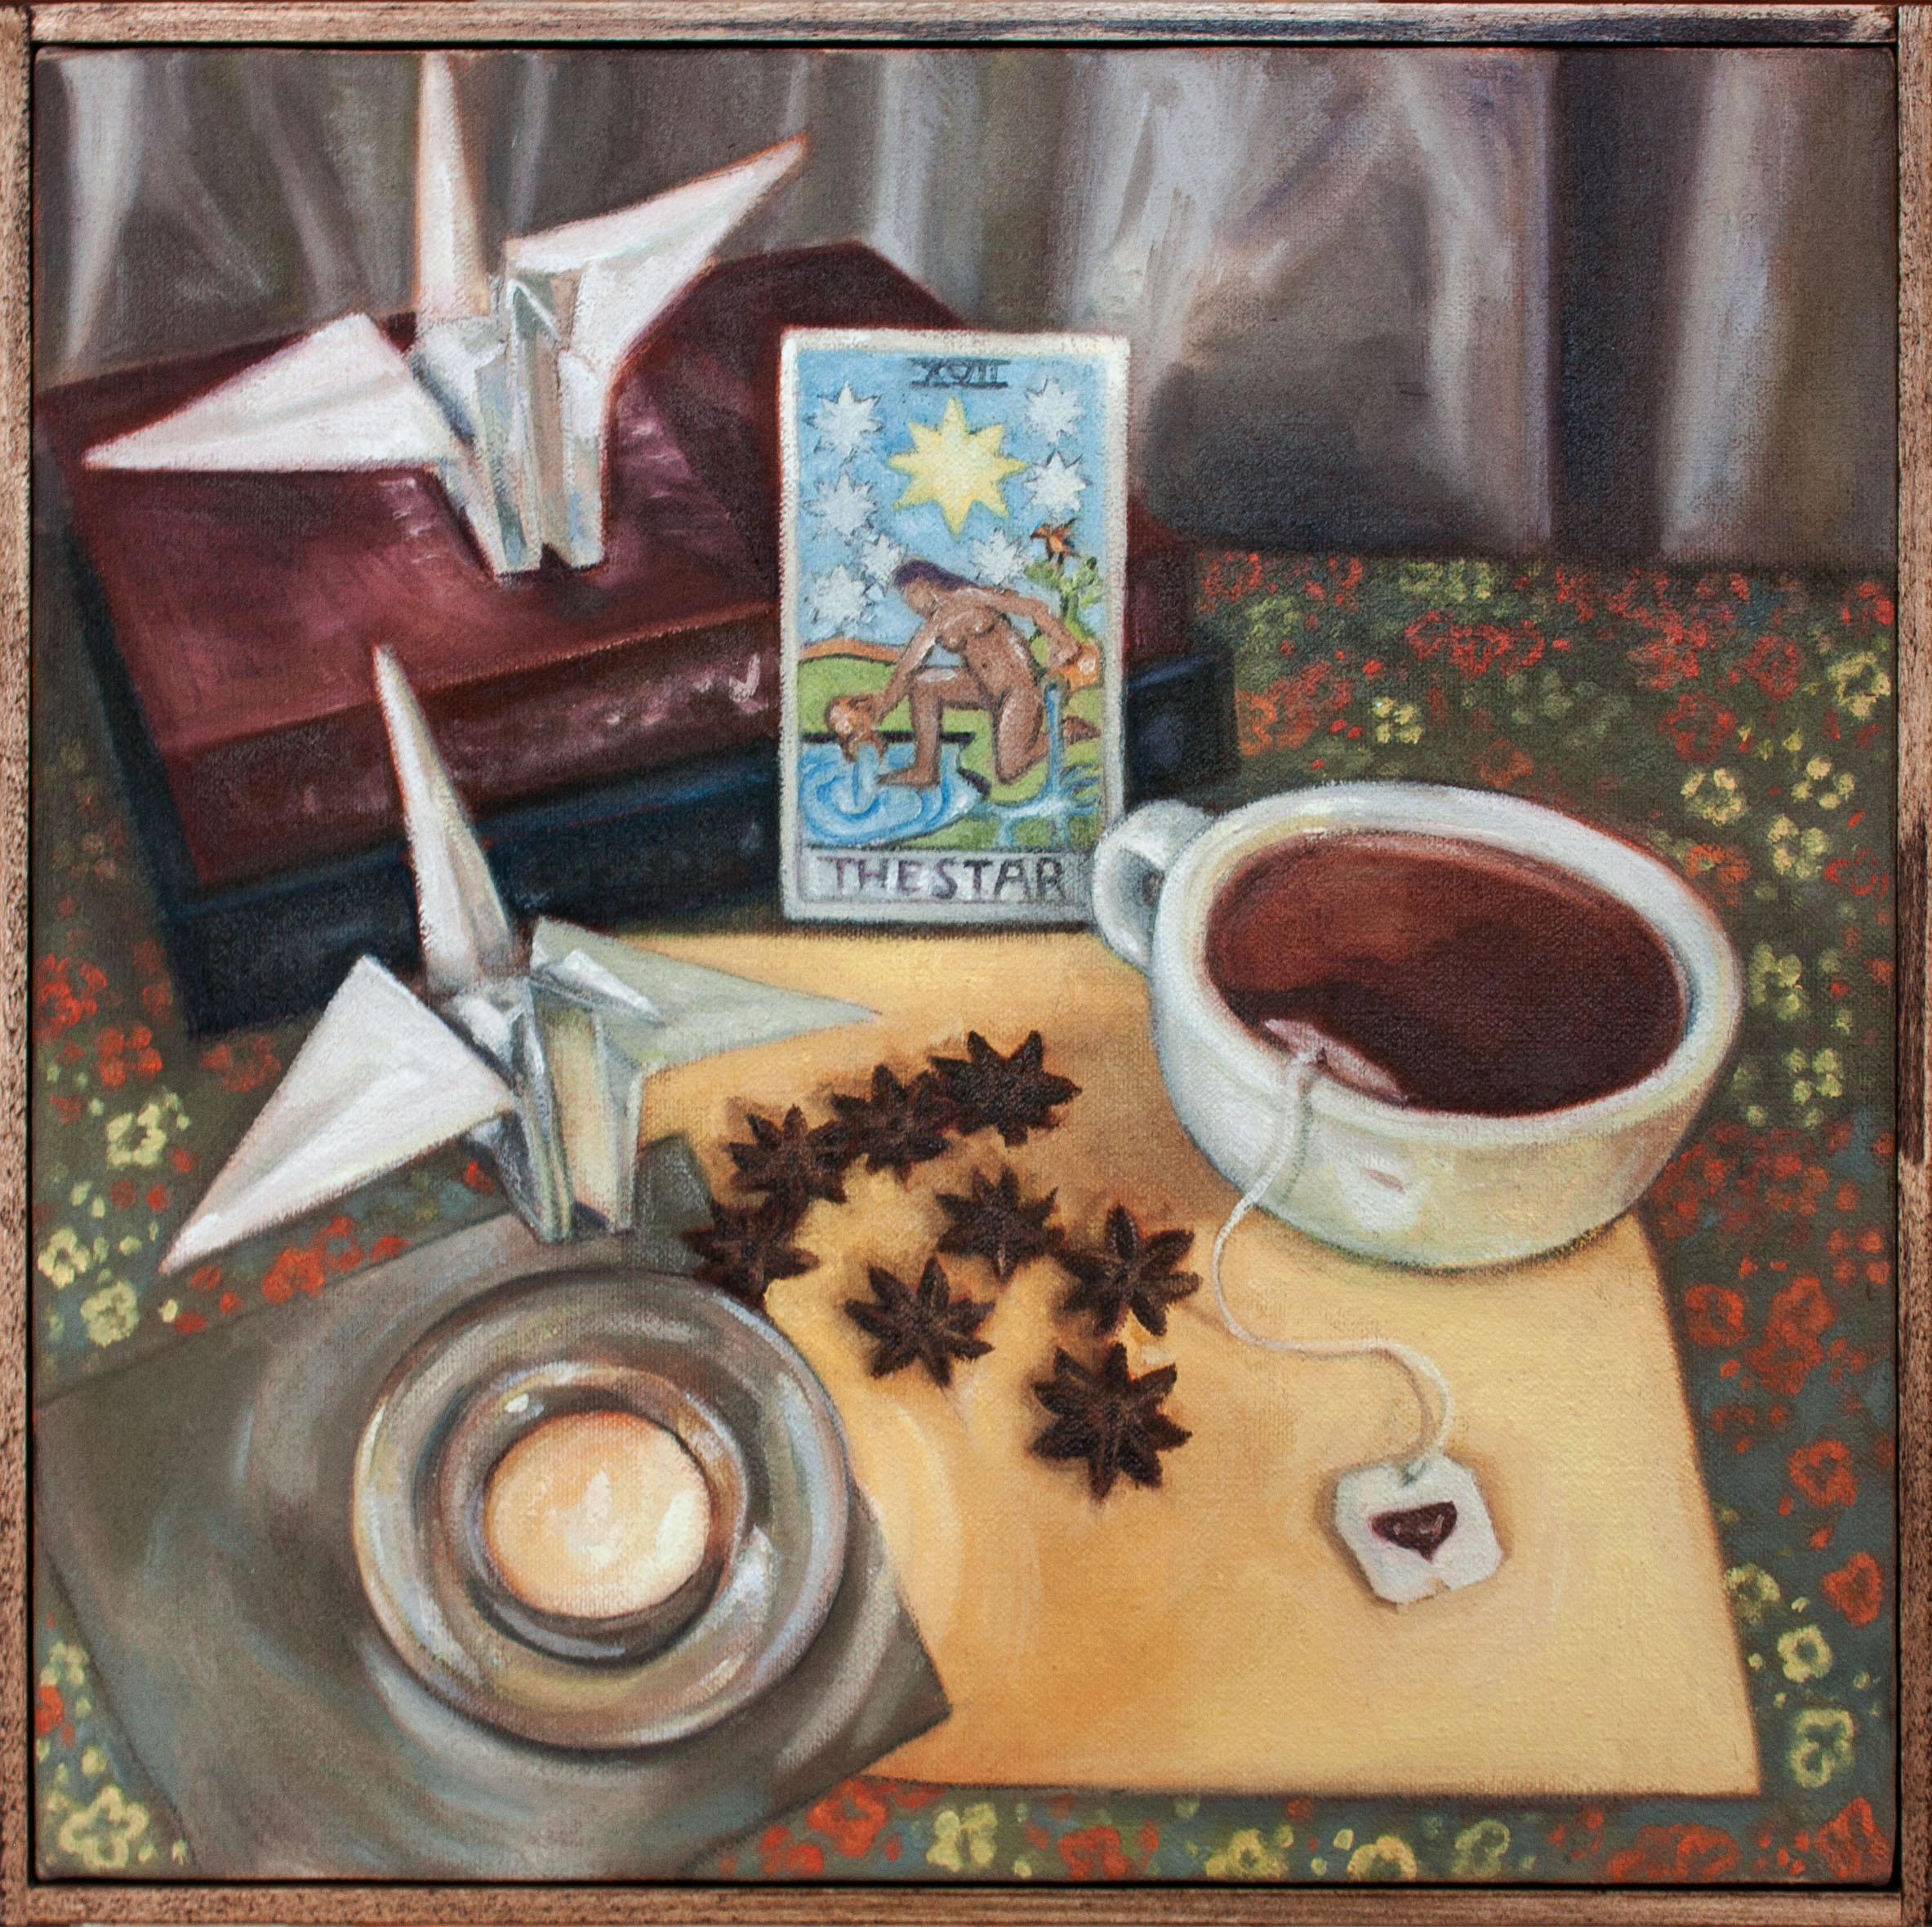 Painting of the Star tarot card, cup of tea, two paper cranes, two books and a candle.